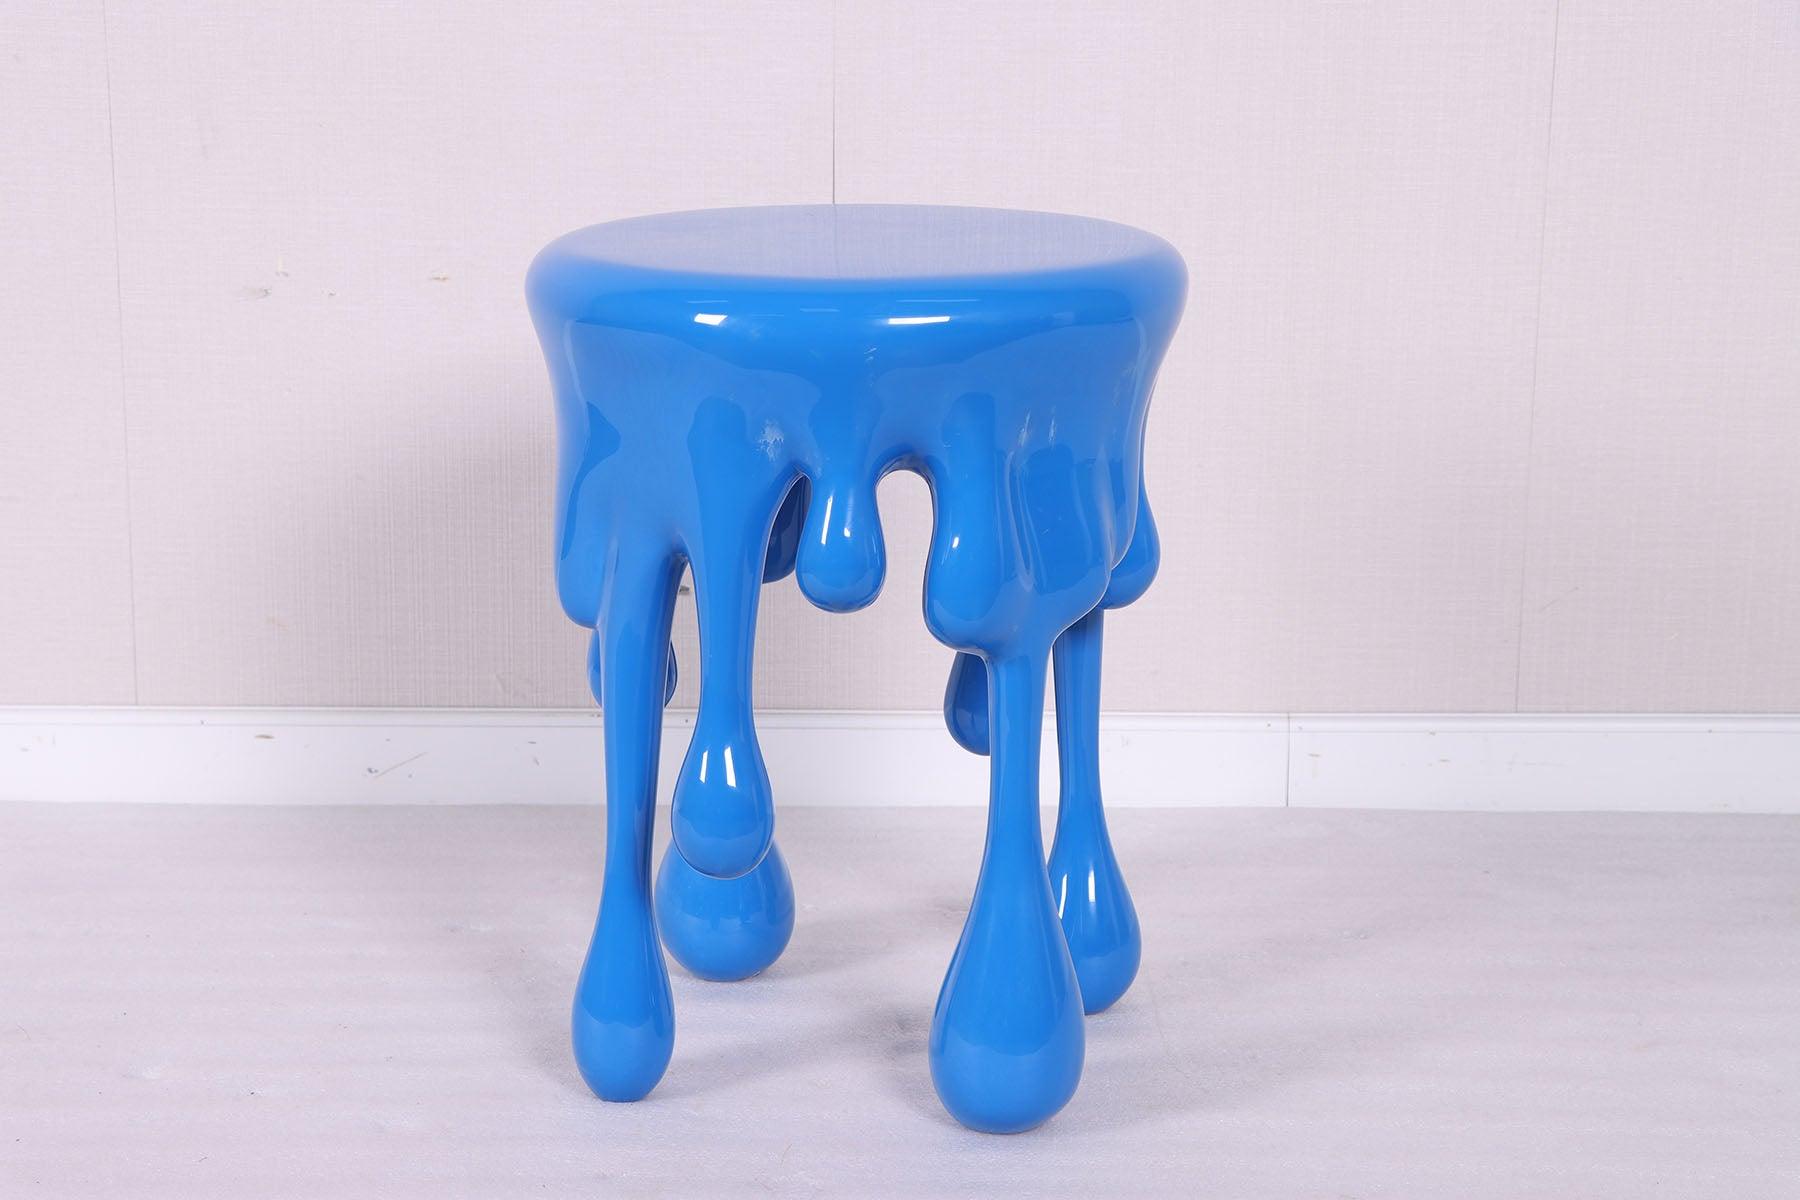 Blue Melting Drip Side Table Statue - LM Treasures Prop Rentals 